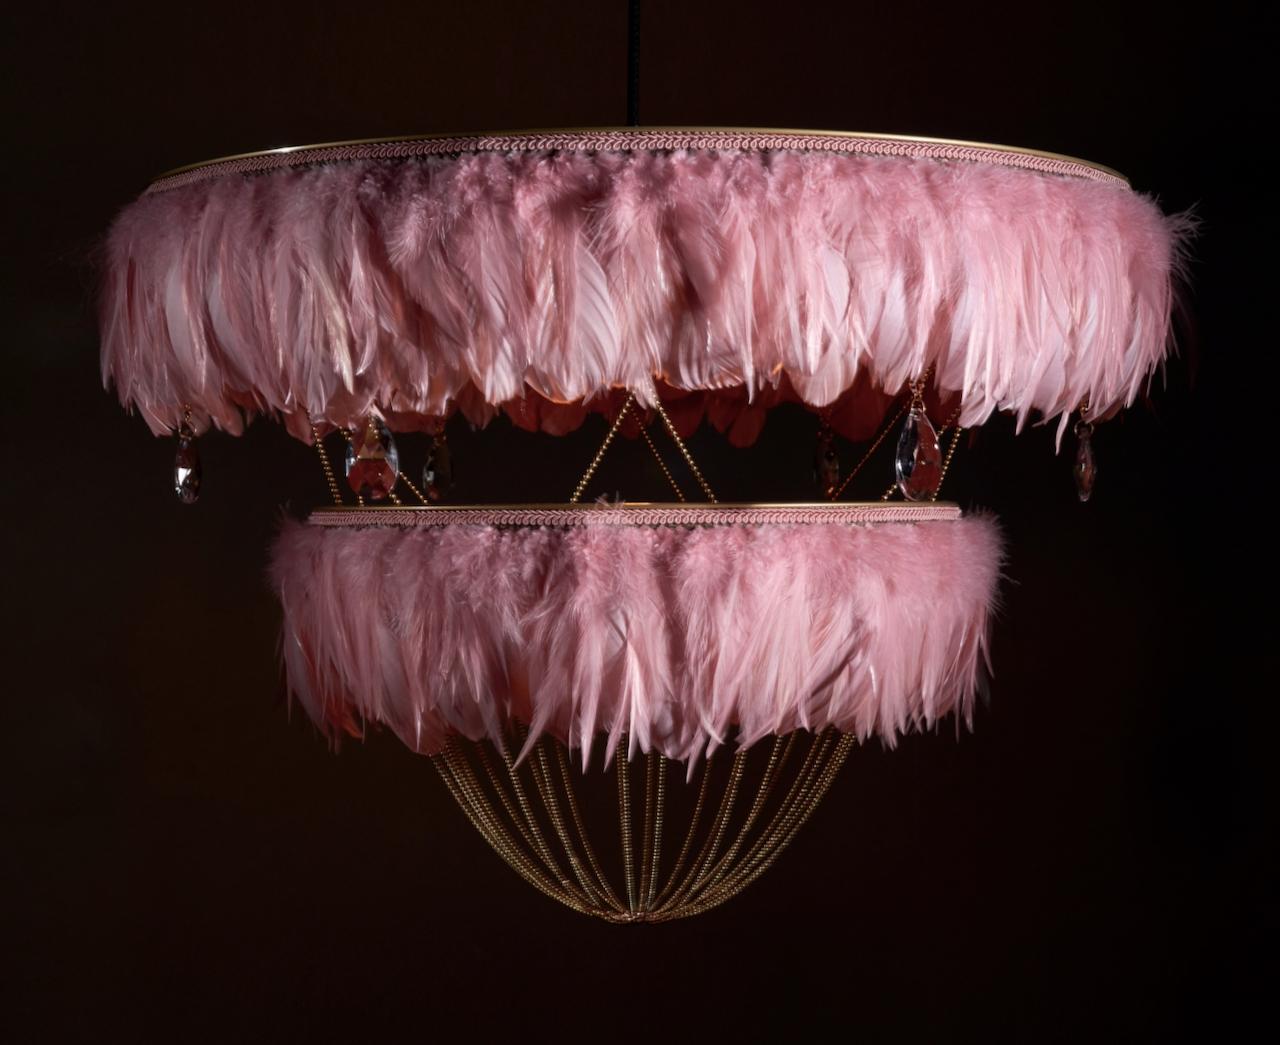 British Feather Chandelier in Flamingo Pink  - Bertie -  Hand Made to order in London.  For Sale